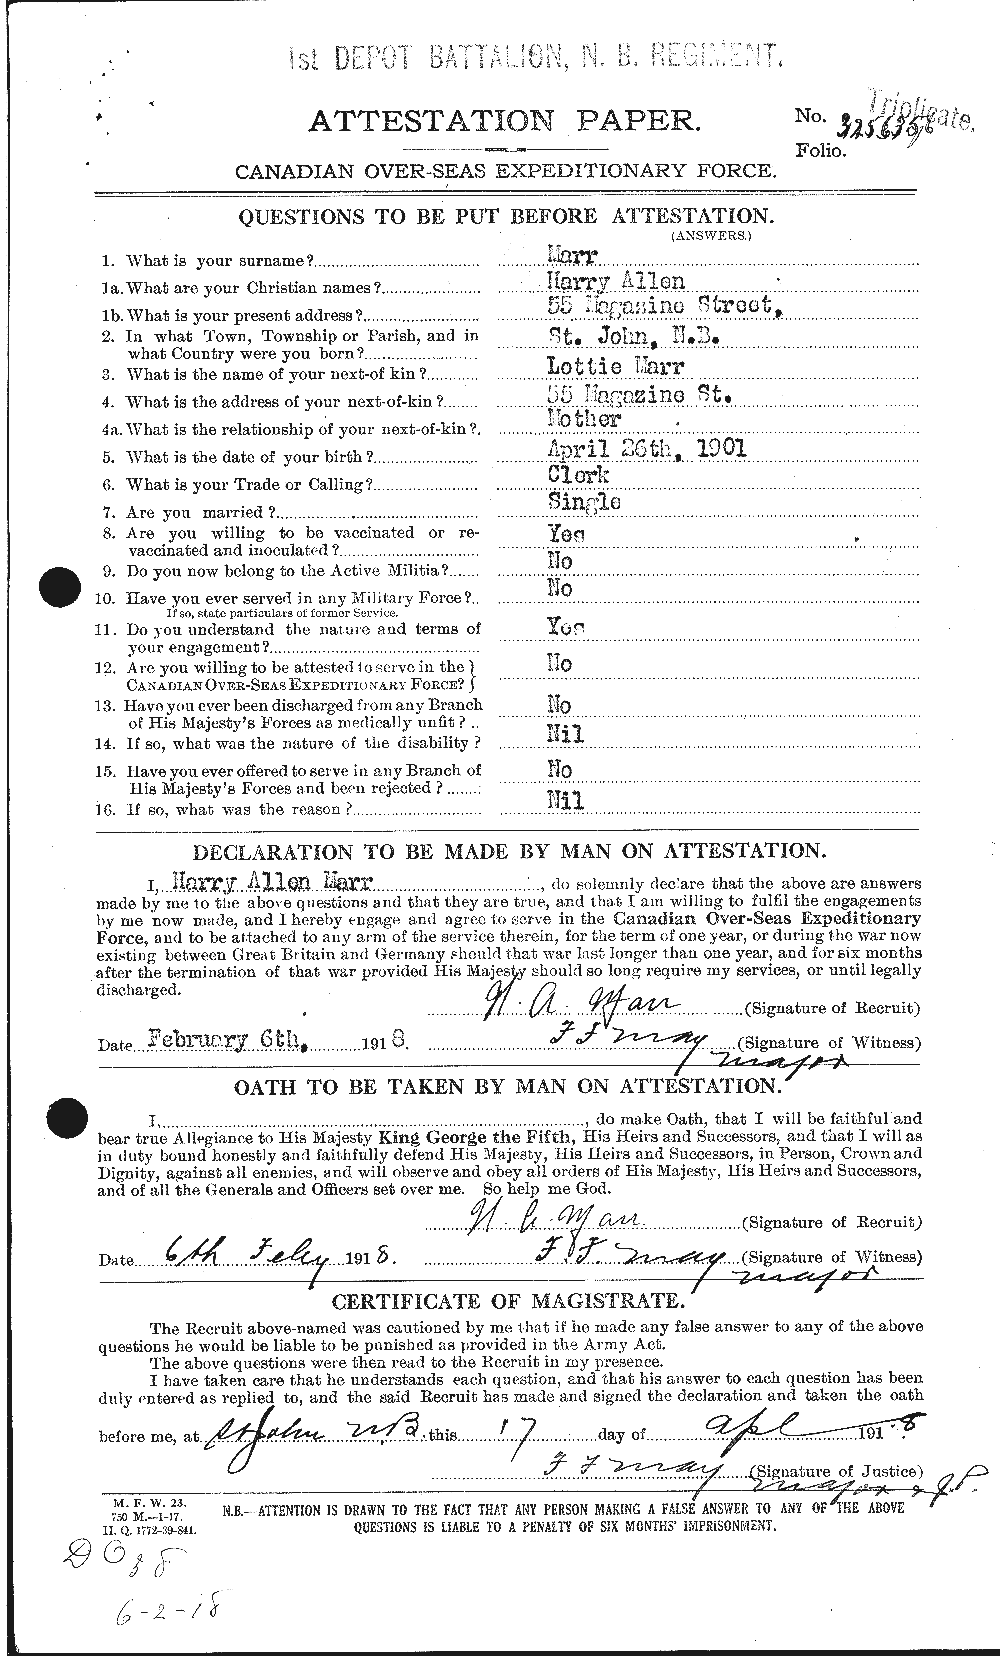 Personnel Records of the First World War - CEF 485633a